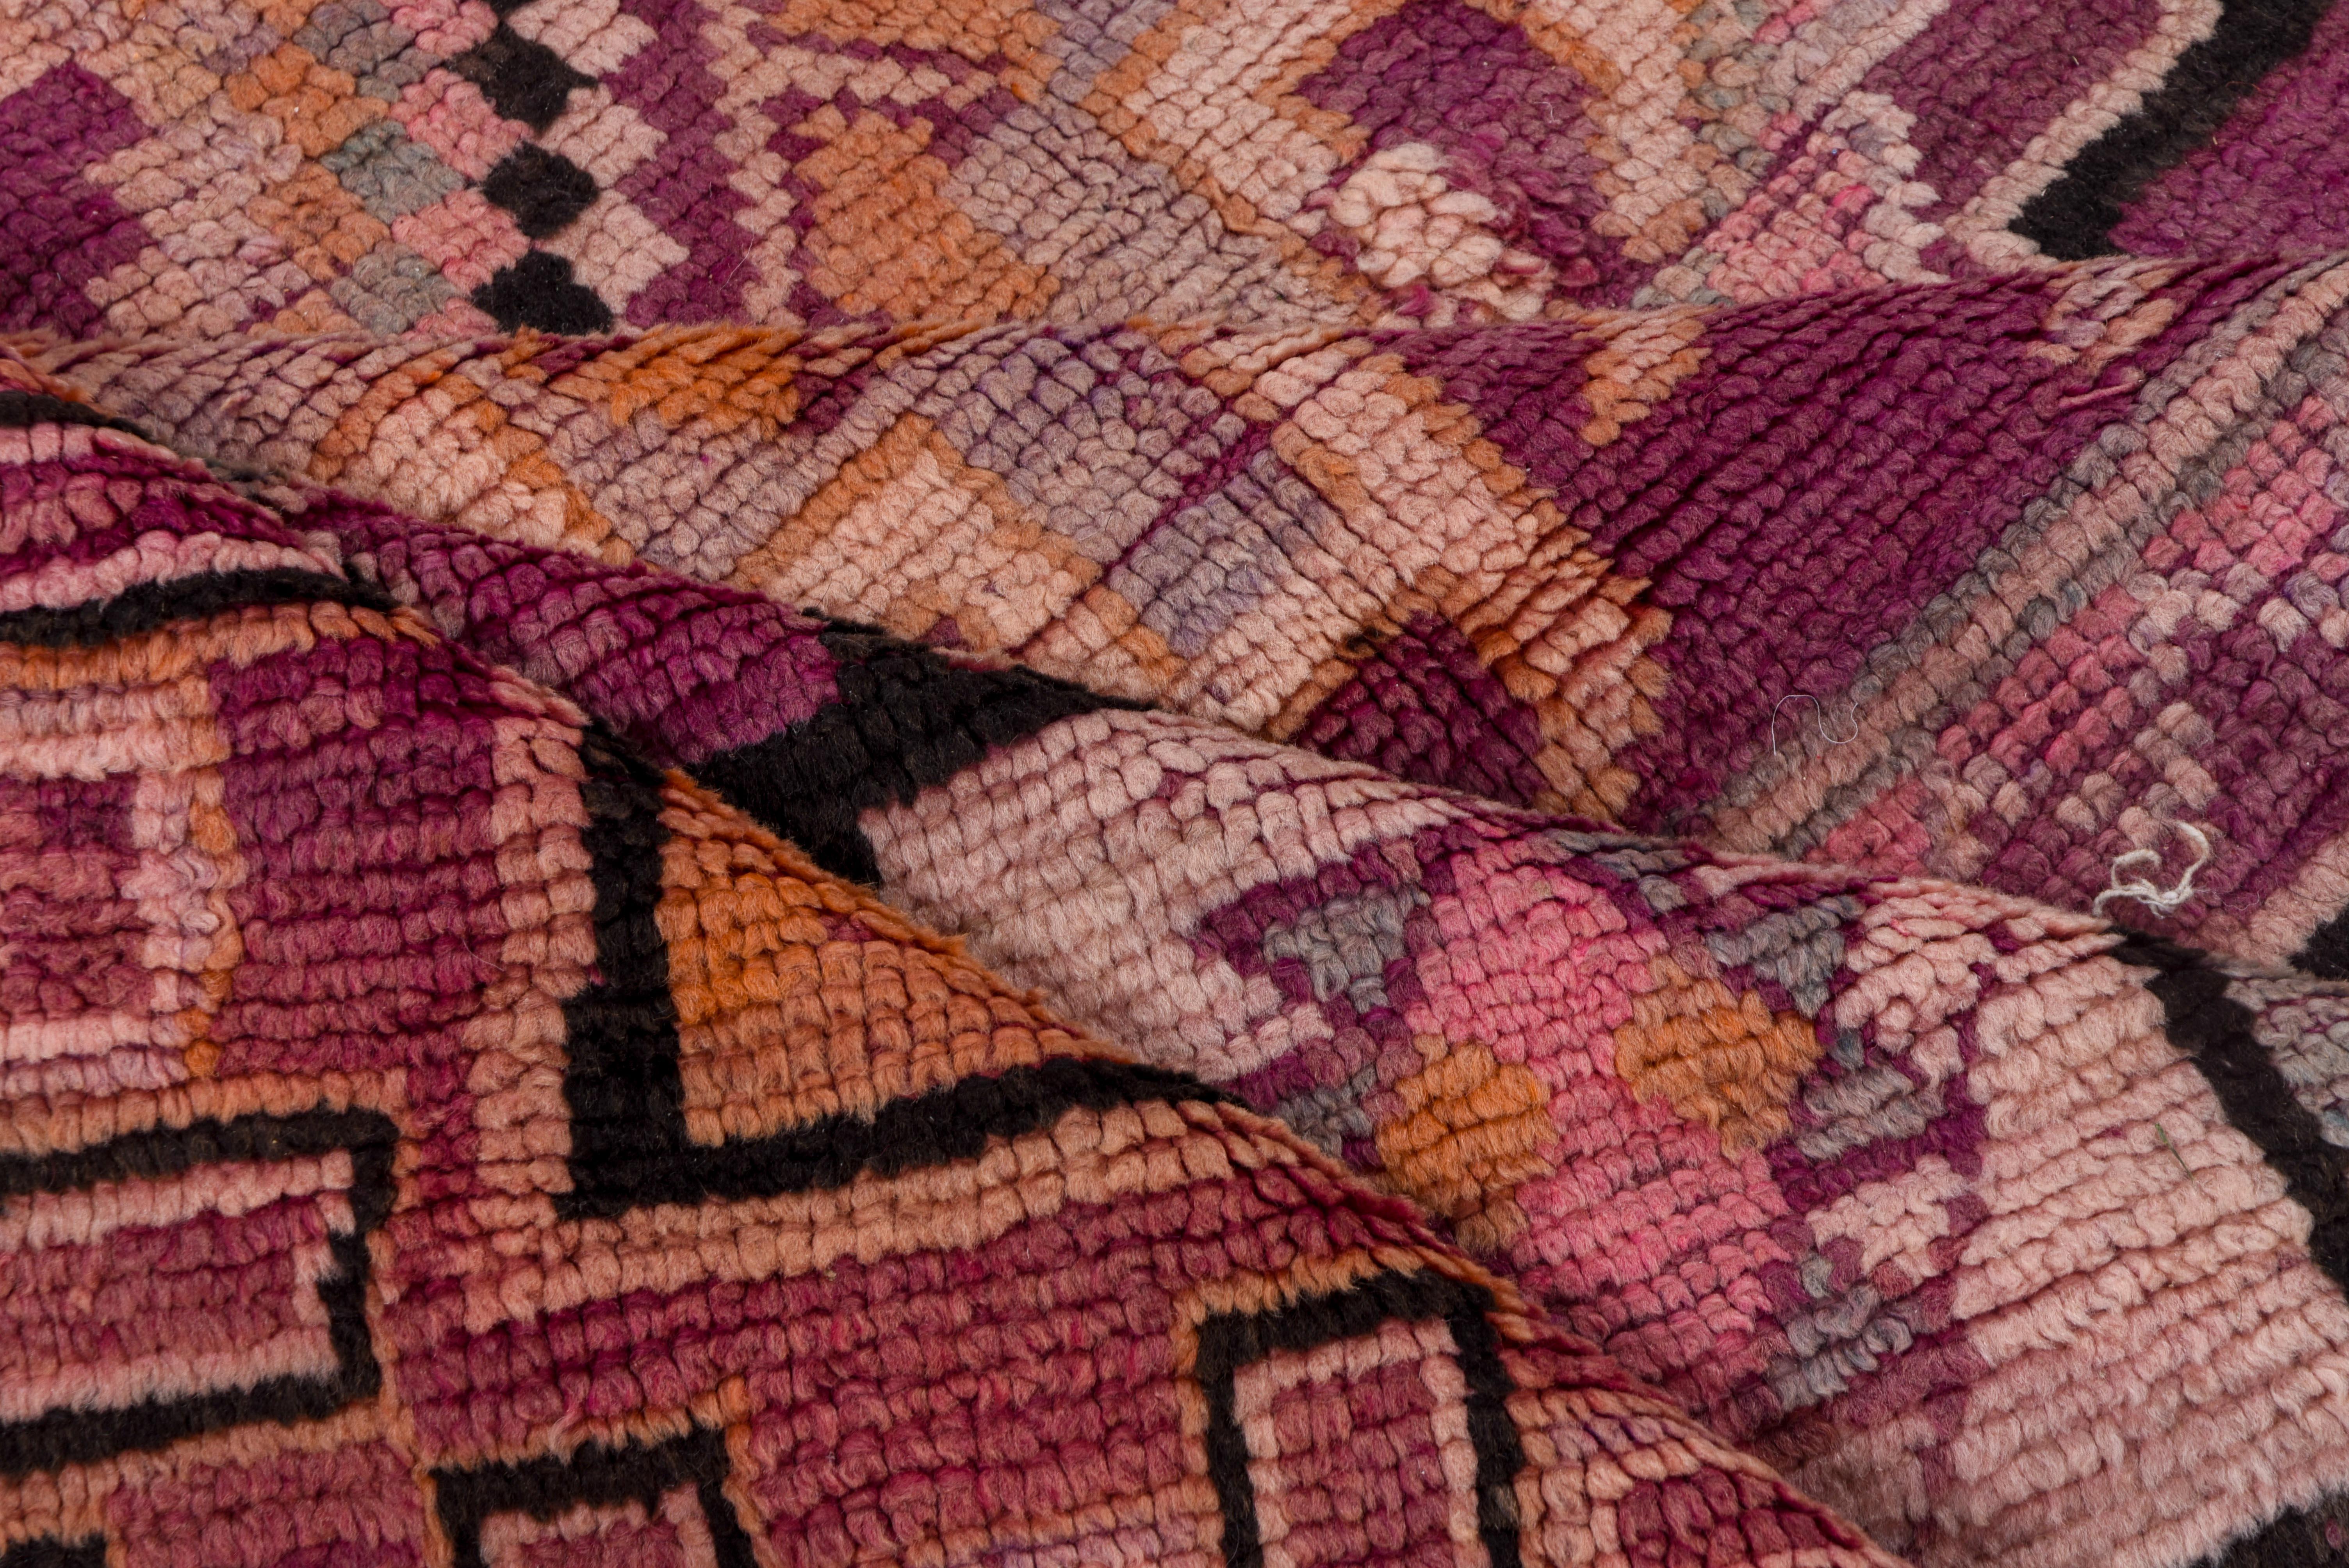 This Moroccan village rug features a large medallion design on the centerfield - with smaller, more accented, repeating diamond motifs acting as a border to the central design. This rug is purple with other like dark colors. 